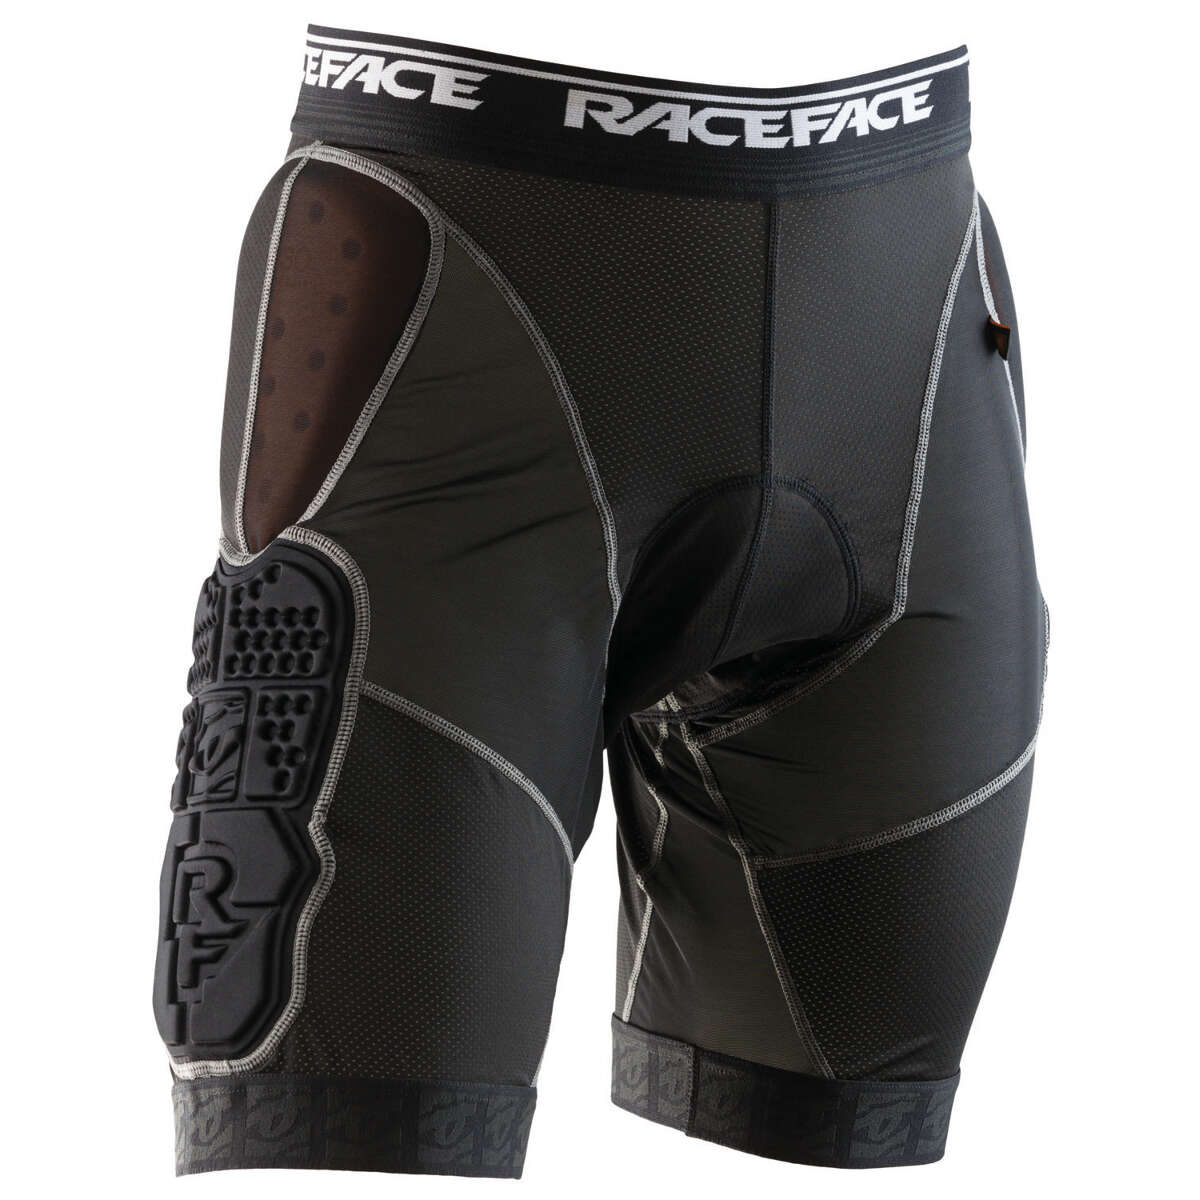 Race Face Pantaloncino Protettivo Flank Liner Stealth